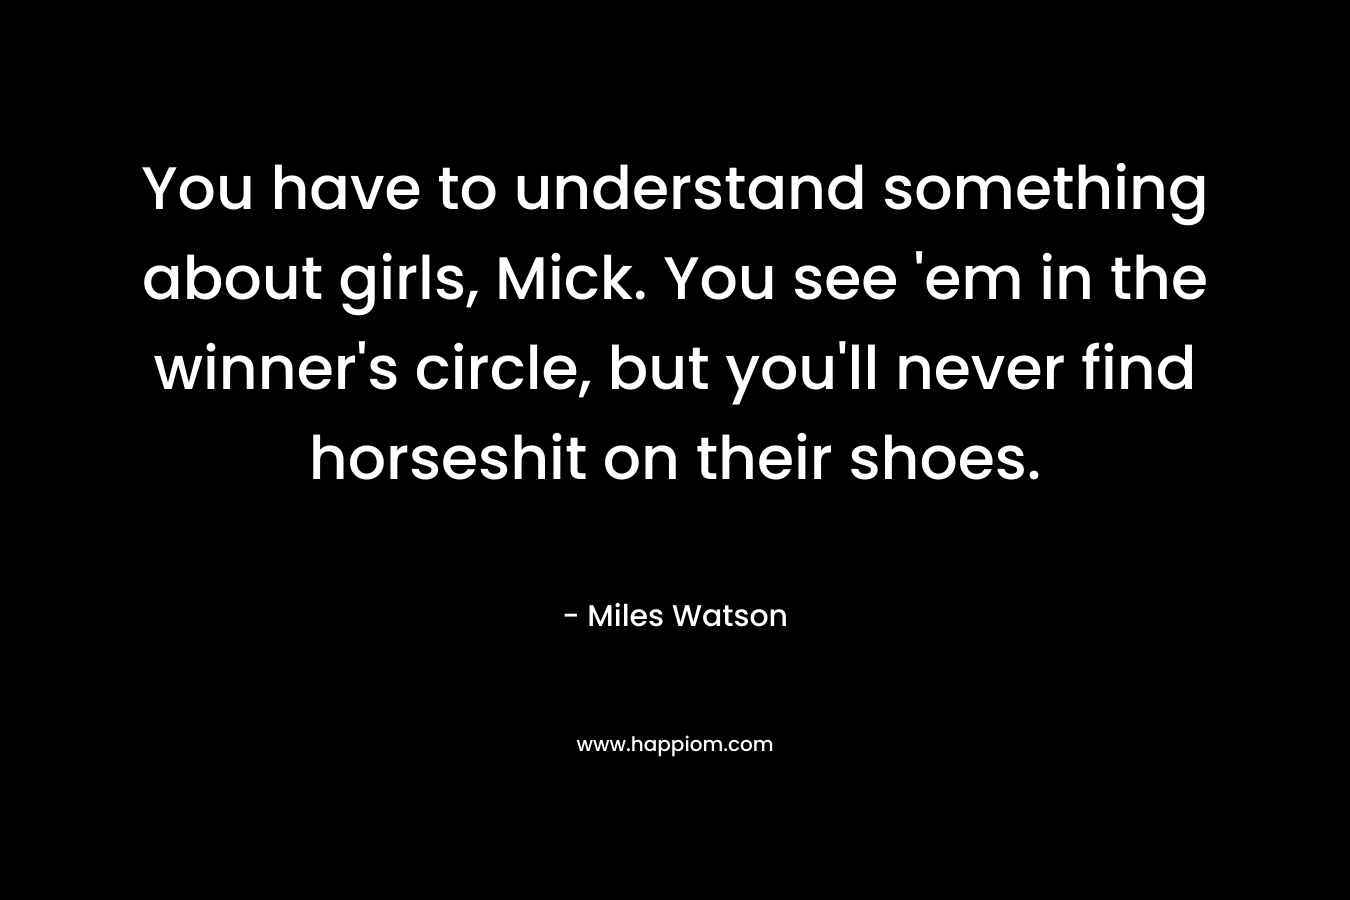 You have to understand something about girls, Mick. You see ’em in the winner’s circle, but you’ll never find horseshit on their shoes. – Miles Watson